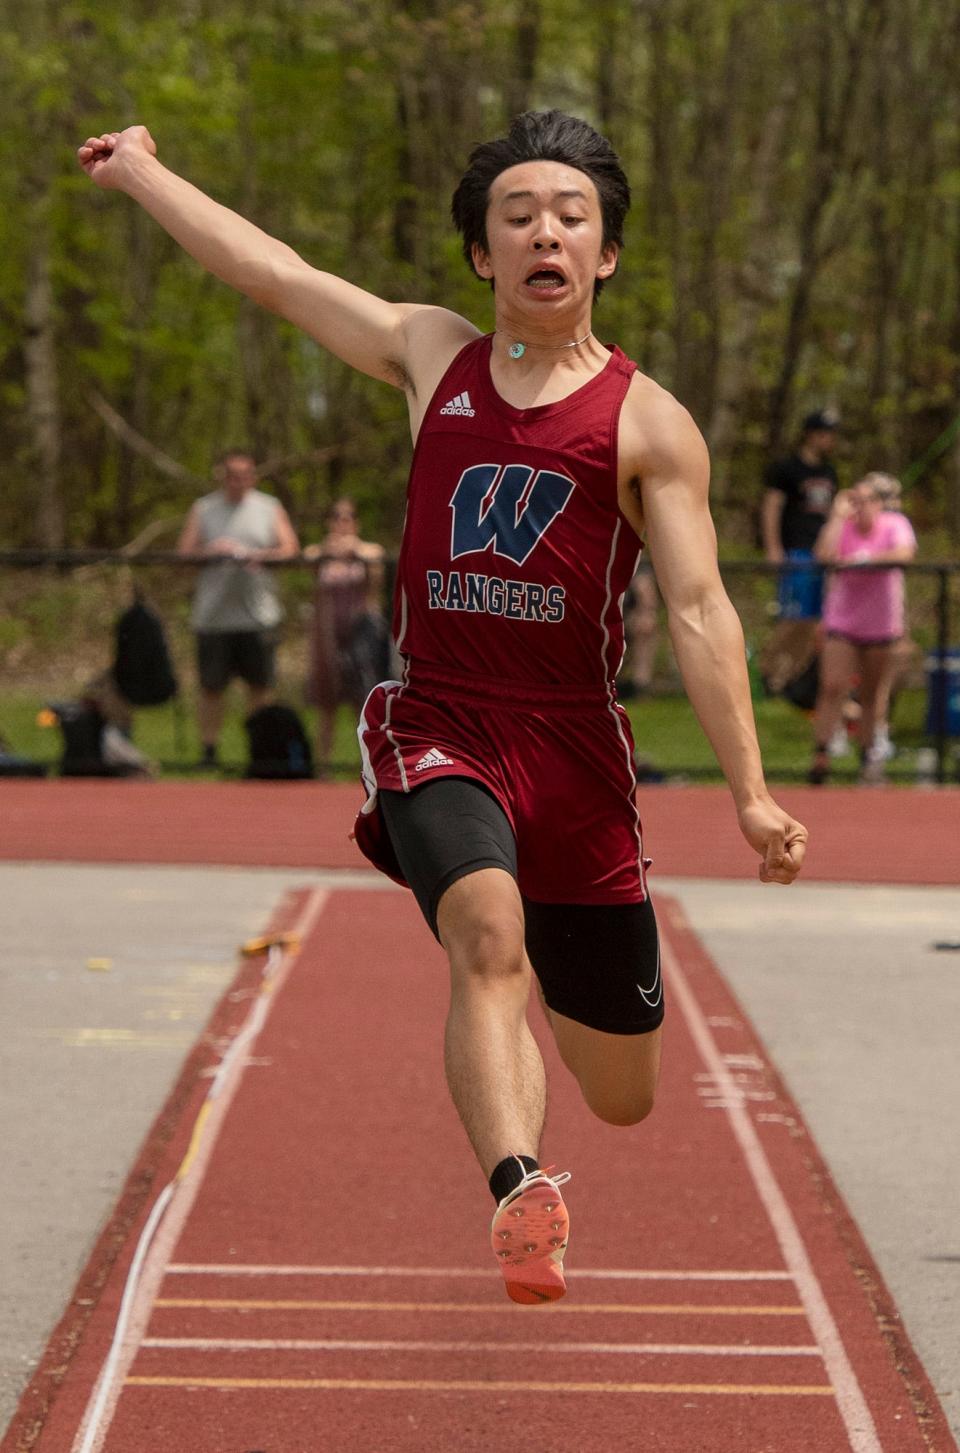 Multi-event standout Alan Nguyen helped power Westborough outdoor track to a state title.